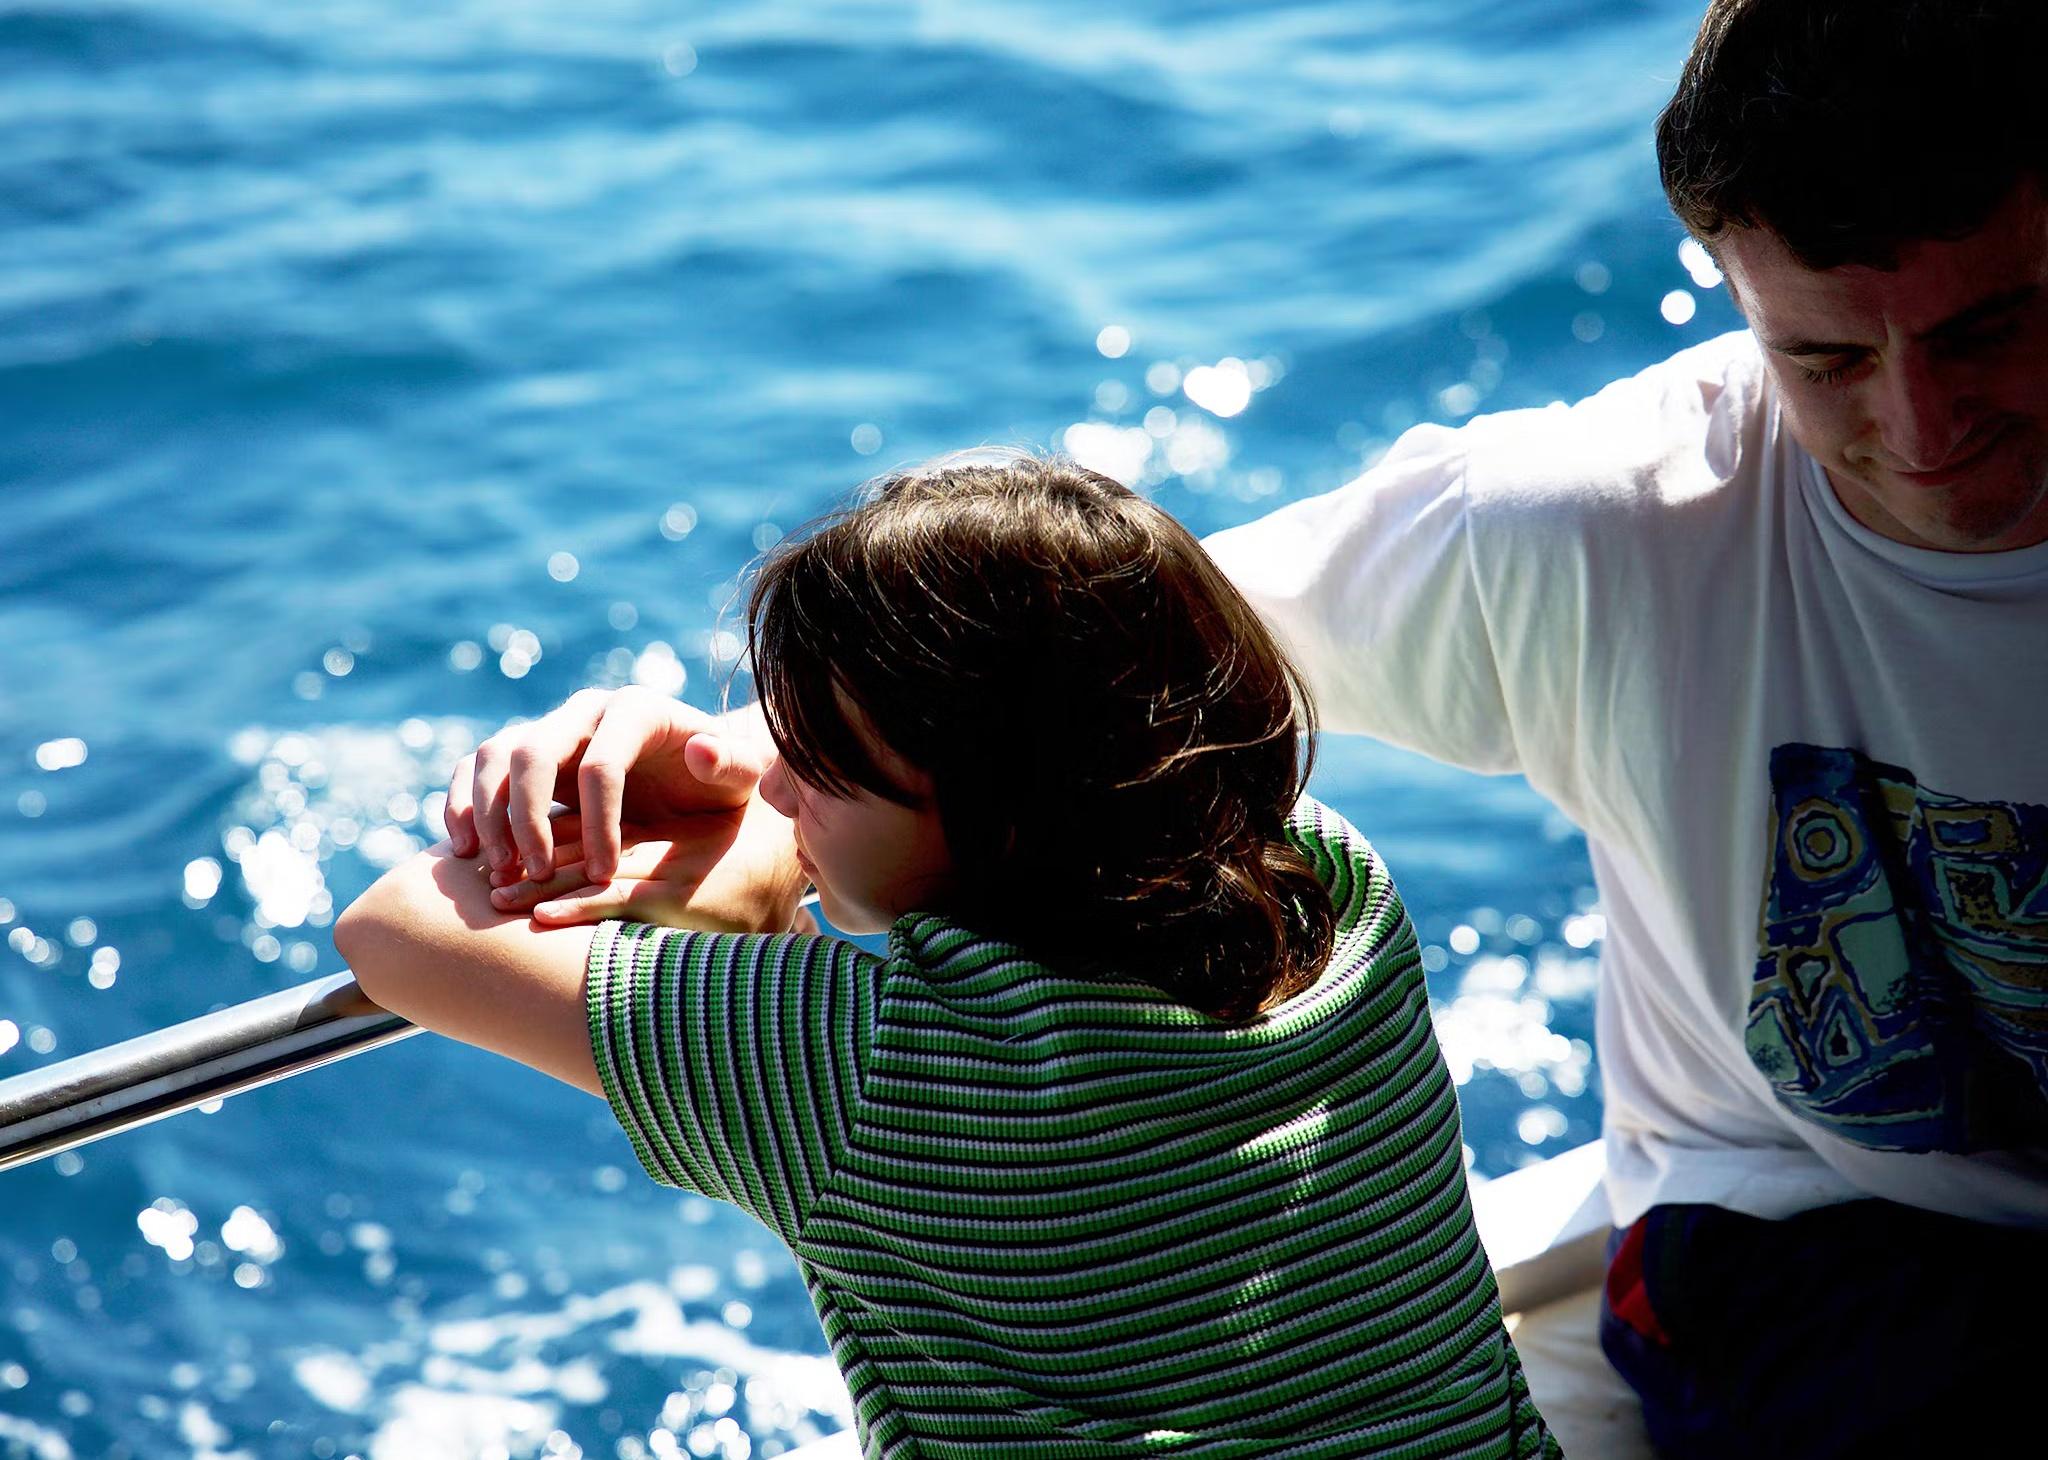 A father and daughter holding hands in the sun on a boat.